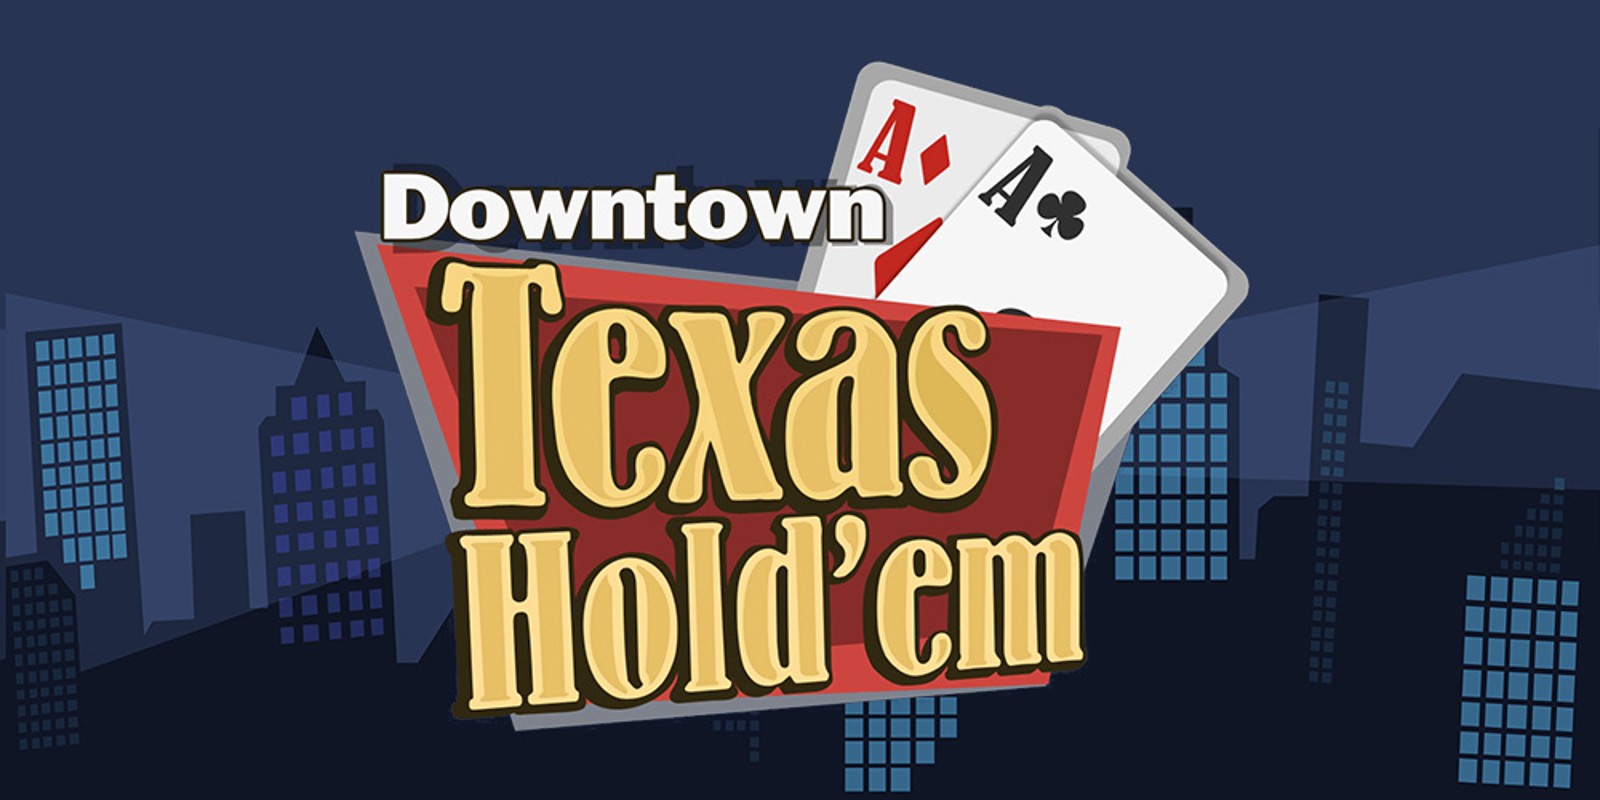 DOWNTOWN TEXAS HOLD 'EM